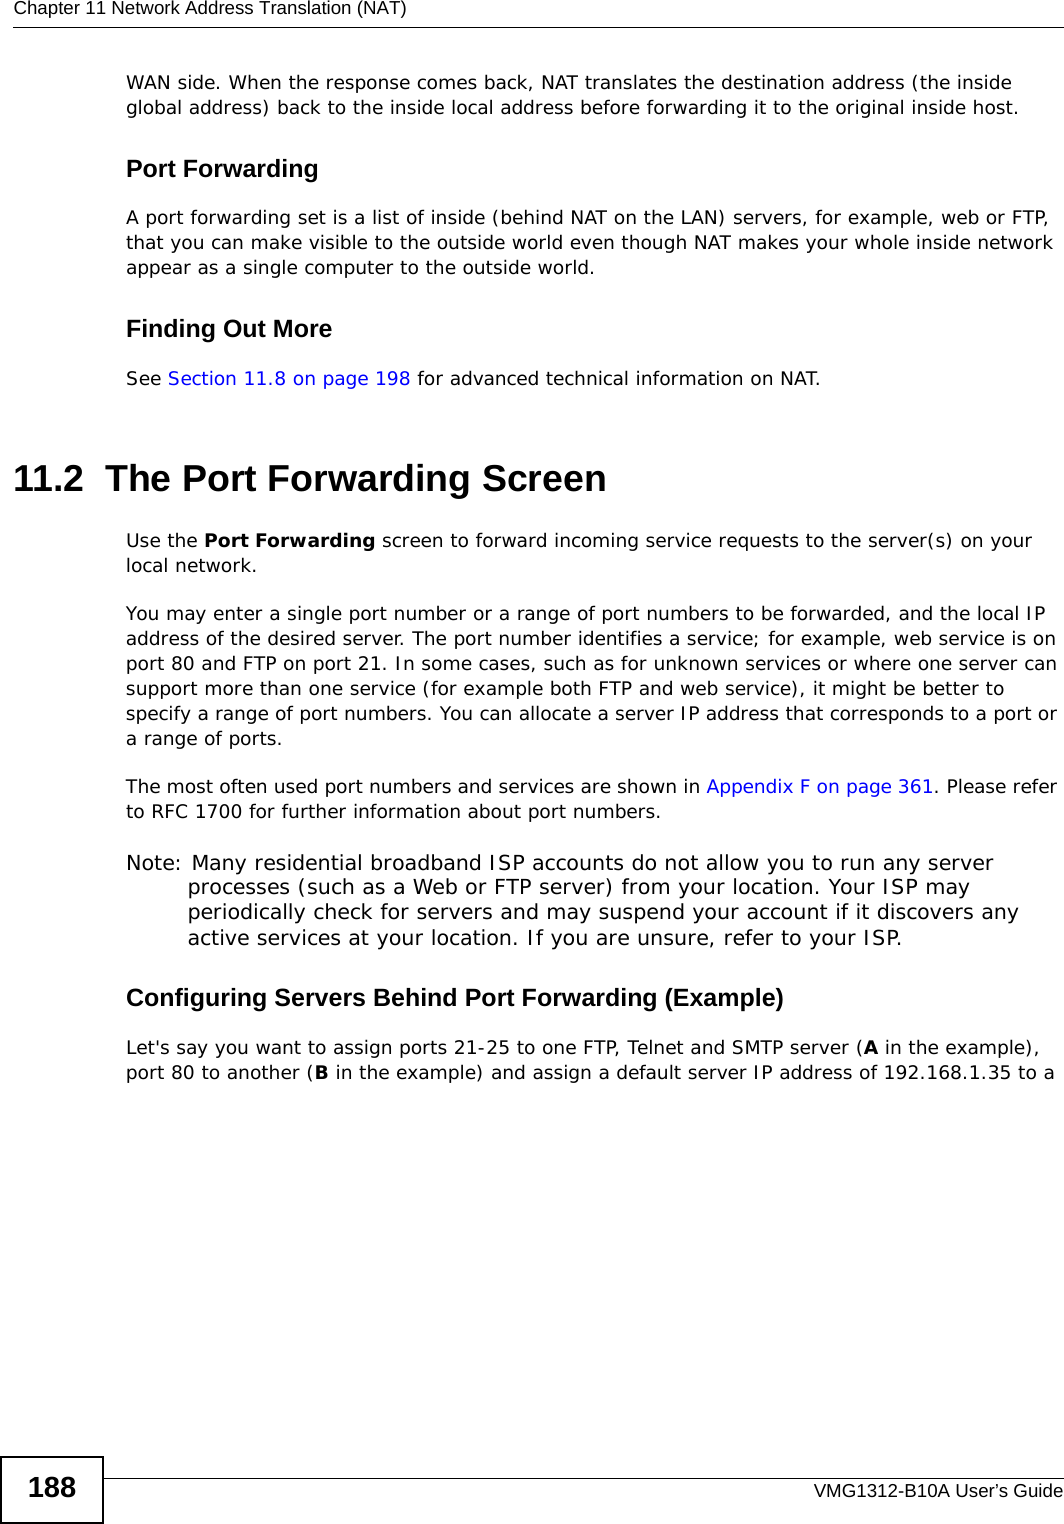 Chapter 11 Network Address Translation (NAT)VMG1312-B10A User’s Guide188WAN side. When the response comes back, NAT translates the destination address (the inside global address) back to the inside local address before forwarding it to the original inside host.Port ForwardingA port forwarding set is a list of inside (behind NAT on the LAN) servers, for example, web or FTP, that you can make visible to the outside world even though NAT makes your whole inside network appear as a single computer to the outside world.Finding Out MoreSee Section 11.8 on page 198 for advanced technical information on NAT.11.2  The Port Forwarding Screen Use the Port Forwarding screen to forward incoming service requests to the server(s) on your local network.You may enter a single port number or a range of port numbers to be forwarded, and the local IP address of the desired server. The port number identifies a service; for example, web service is on port 80 and FTP on port 21. In some cases, such as for unknown services or where one server can support more than one service (for example both FTP and web service), it might be better to specify a range of port numbers. You can allocate a server IP address that corresponds to a port or a range of ports.The most often used port numbers and services are shown in Appendix F on page 361. Please refer to RFC 1700 for further information about port numbers. Note: Many residential broadband ISP accounts do not allow you to run any server processes (such as a Web or FTP server) from your location. Your ISP may periodically check for servers and may suspend your account if it discovers any active services at your location. If you are unsure, refer to your ISP.Configuring Servers Behind Port Forwarding (Example)Let&apos;s say you want to assign ports 21-25 to one FTP, Telnet and SMTP server (A in the example), port 80 to another (B in the example) and assign a default server IP address of 192.168.1.35 to a 